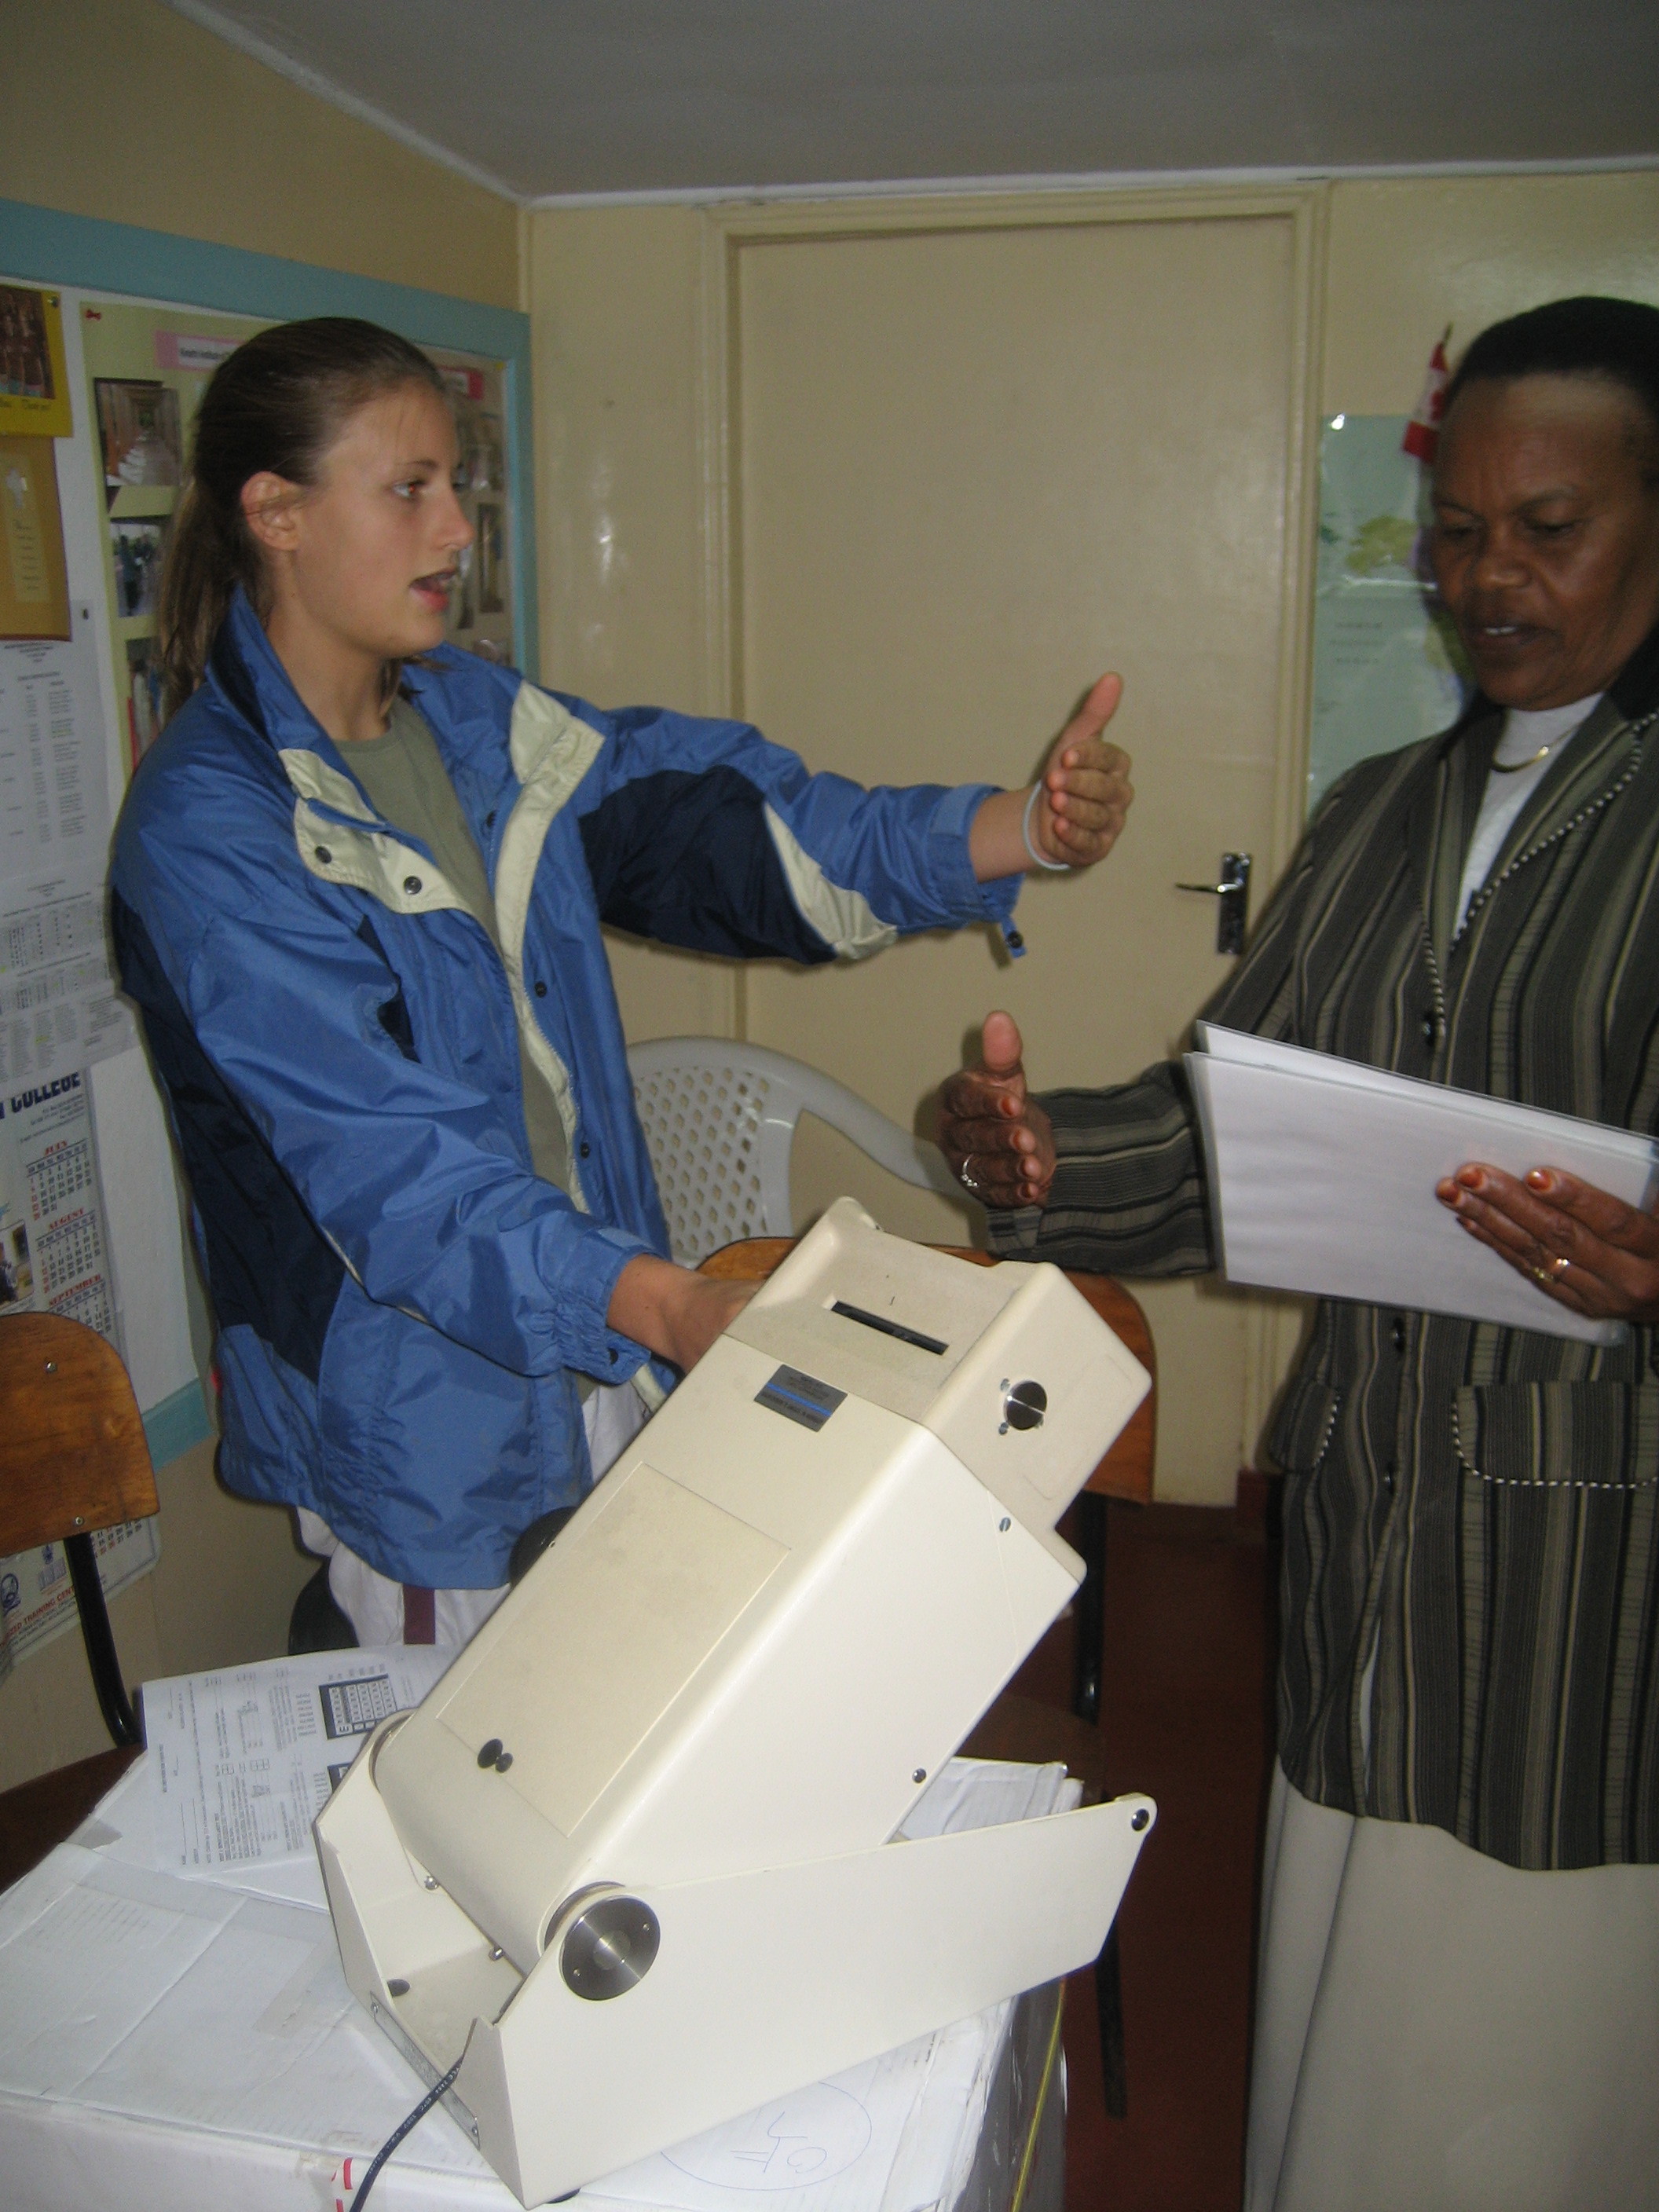  Hannah helps a nurse learn how to work the new vision testing machine at the Sugarbaker Memorial Clinic. 